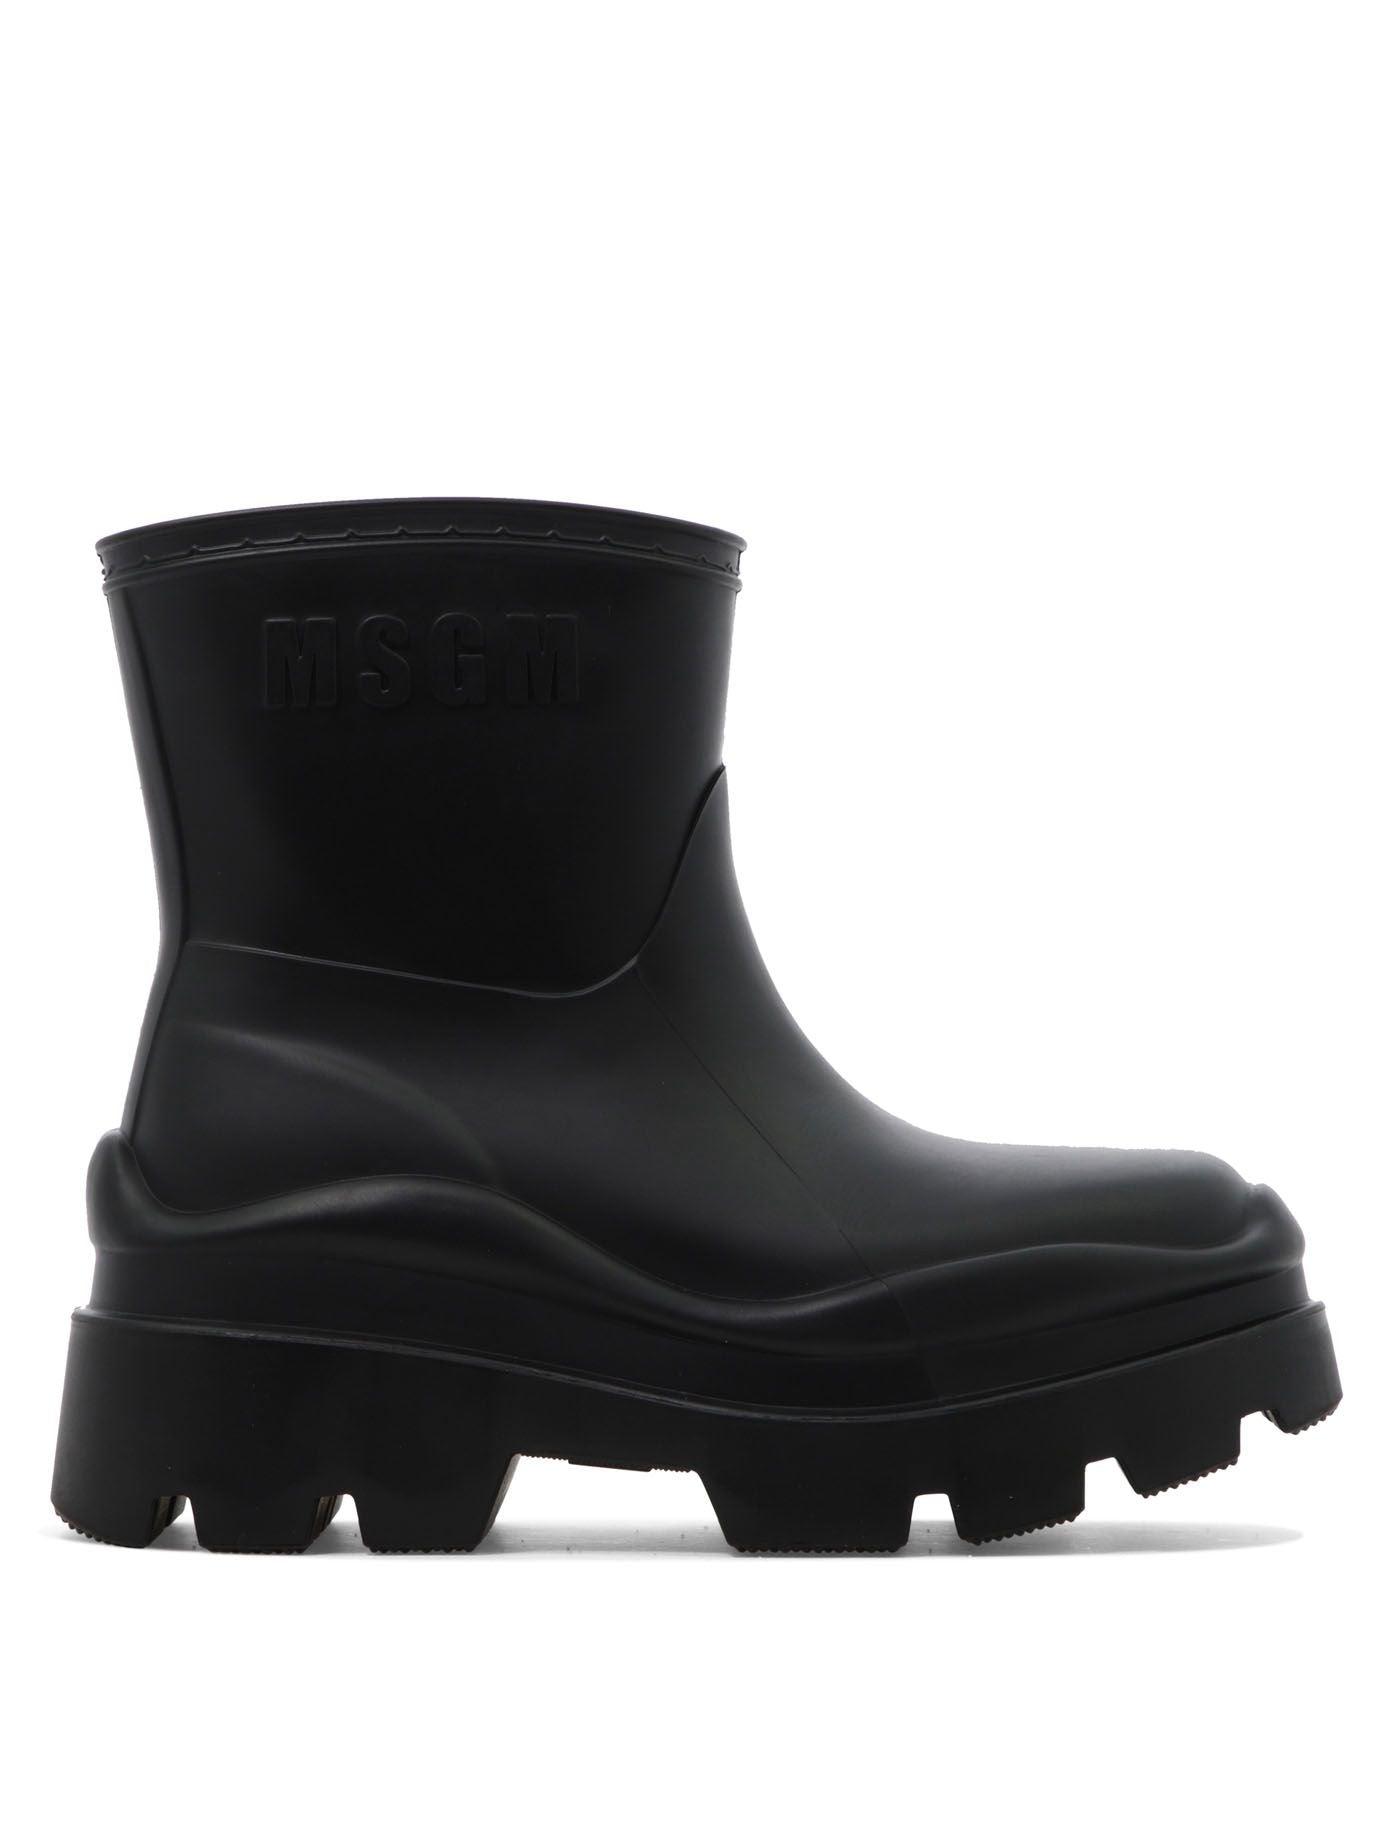 MSGM Ankle Boots in Black | Lyst